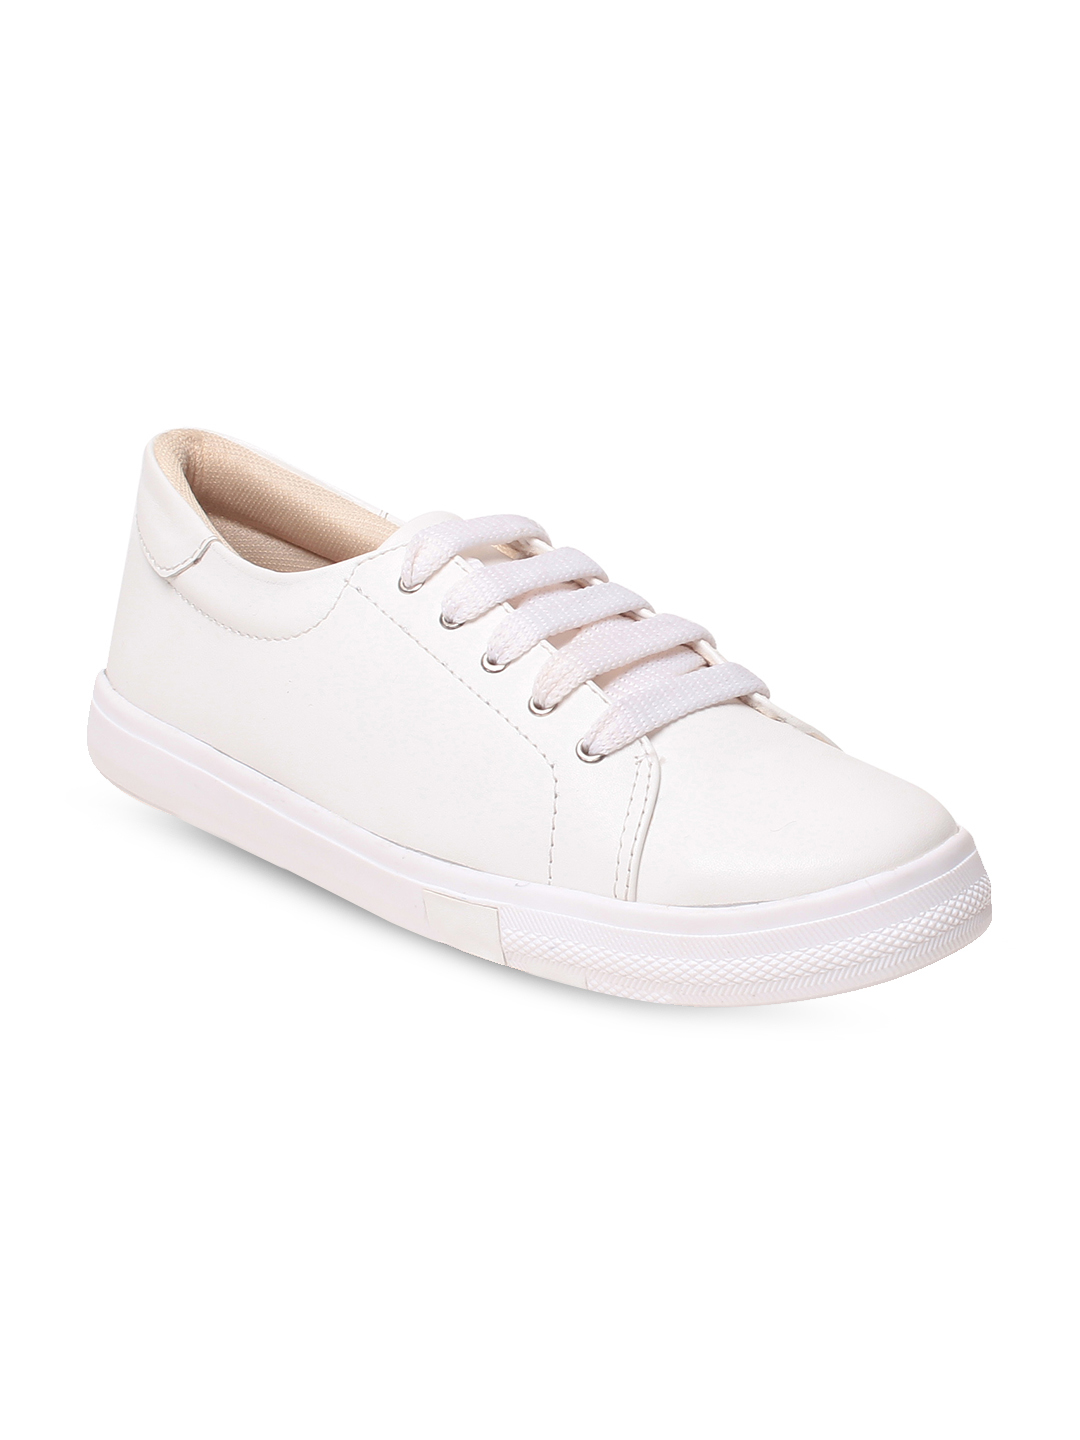 GNIST Women White Solid Sneakers Price in India